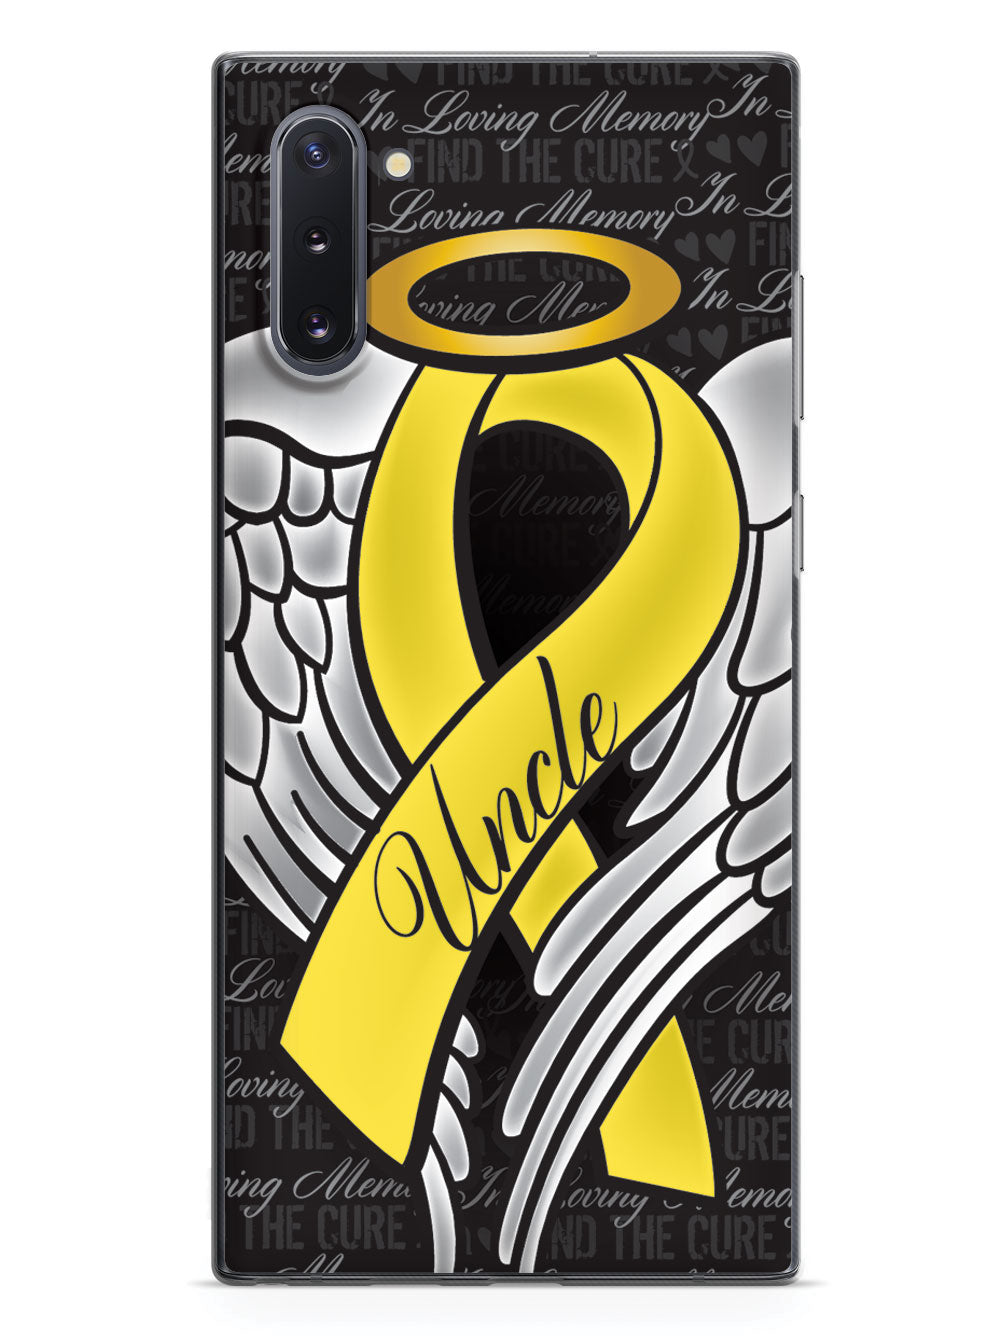 In Loving Memory of My Uncle - Yellow Ribbon Case